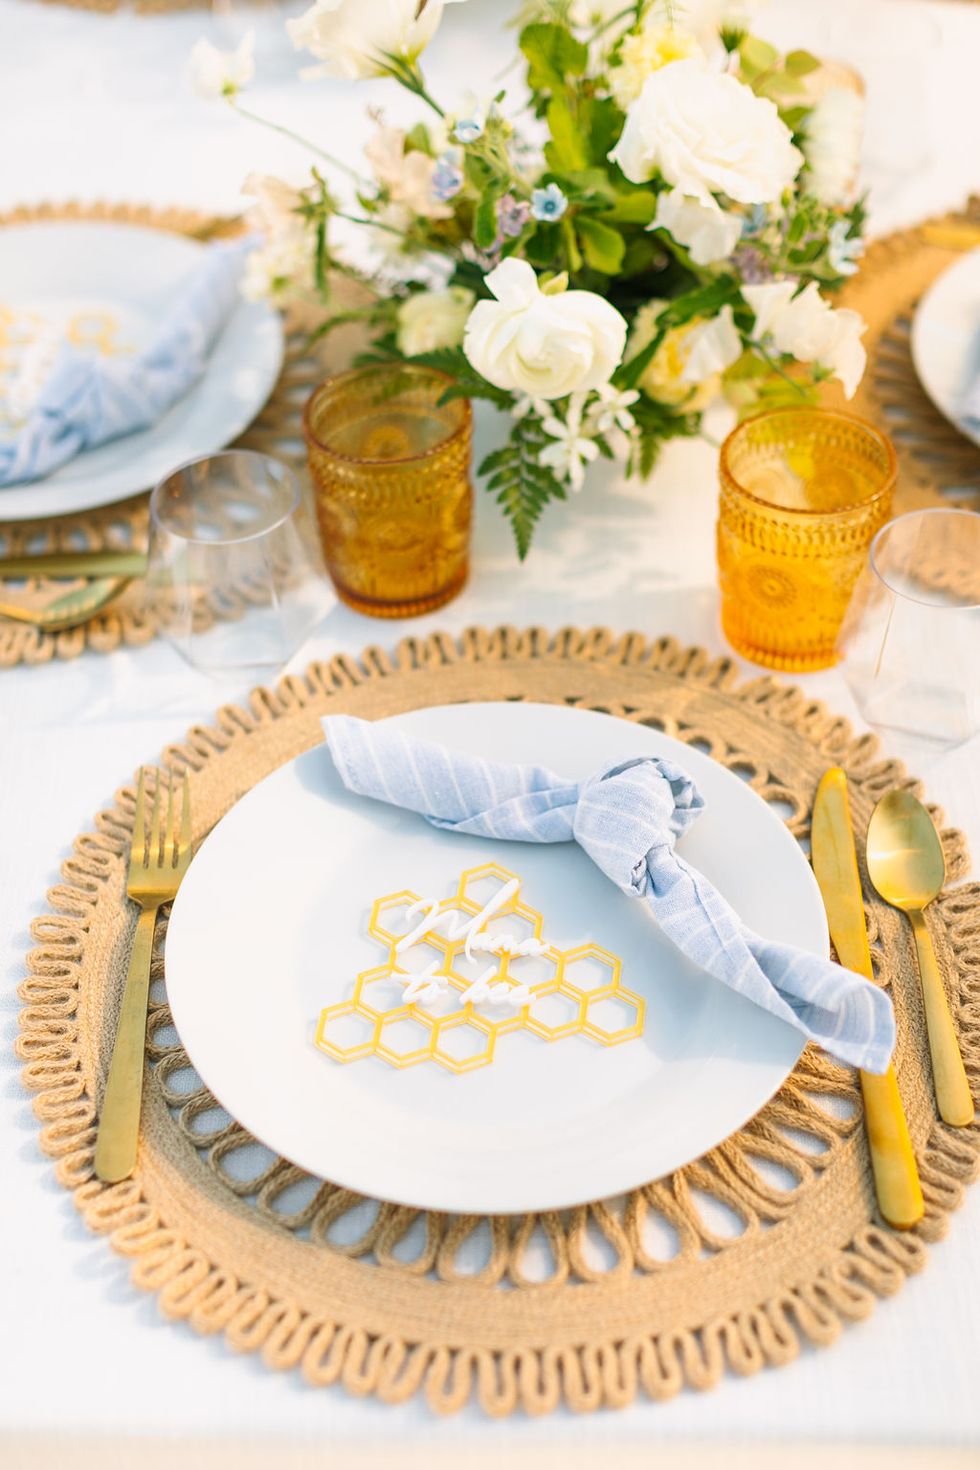 10 Adorable Baby Shower Themes to Welcome Your New Arrival